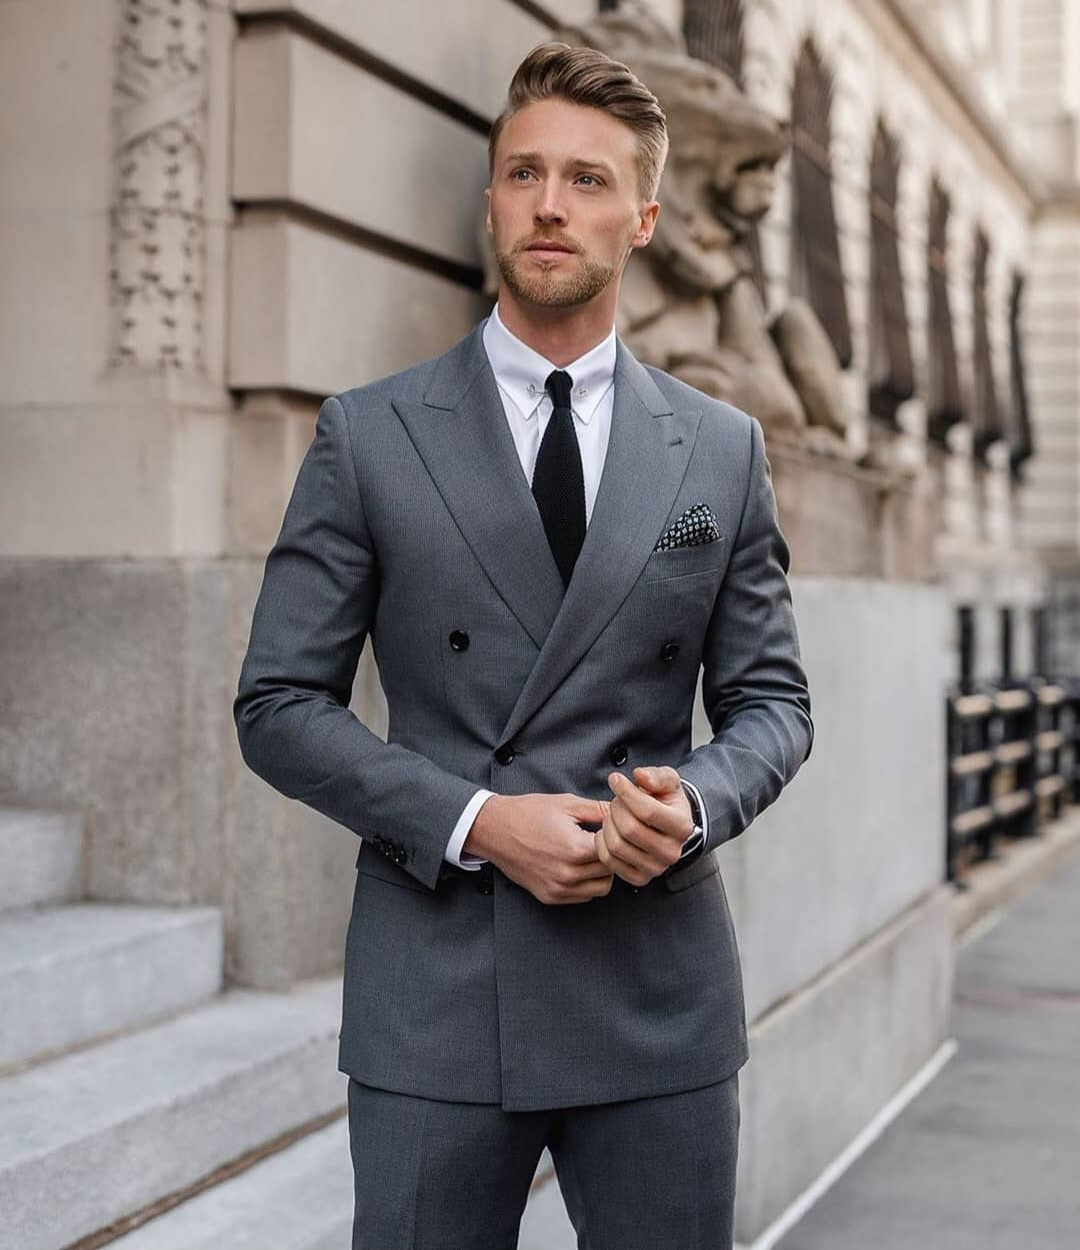 wearing double-breasted grey suit formally